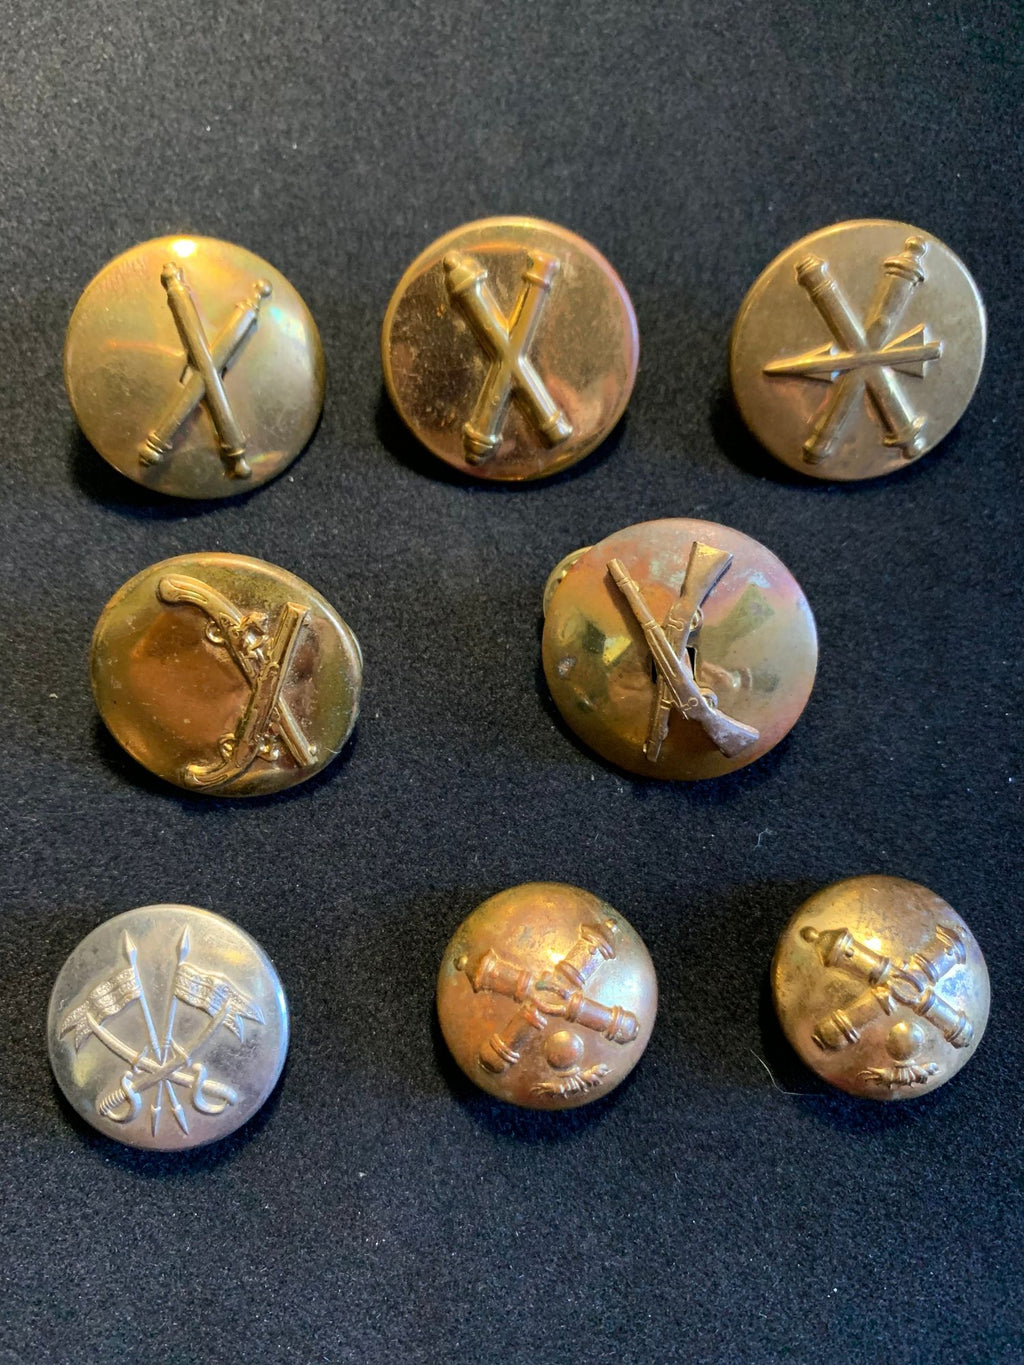 WWII US Army Infantry Cross Rifle Collar Pins and Buttons-Lot of 8